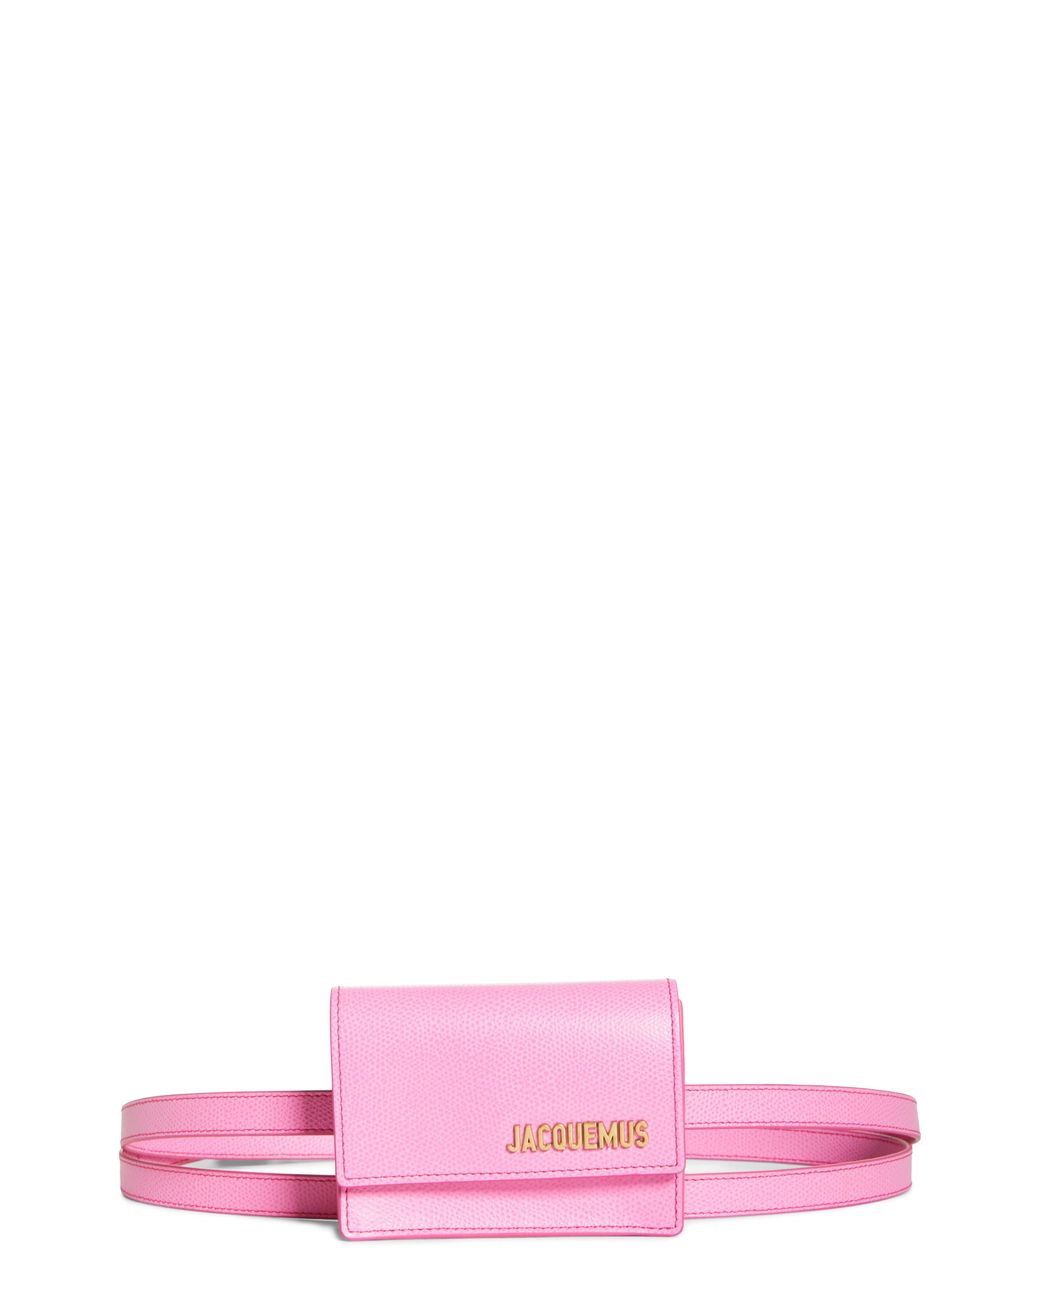 Jacquemus Bello Leather Belt Bag in Pink | Lyst